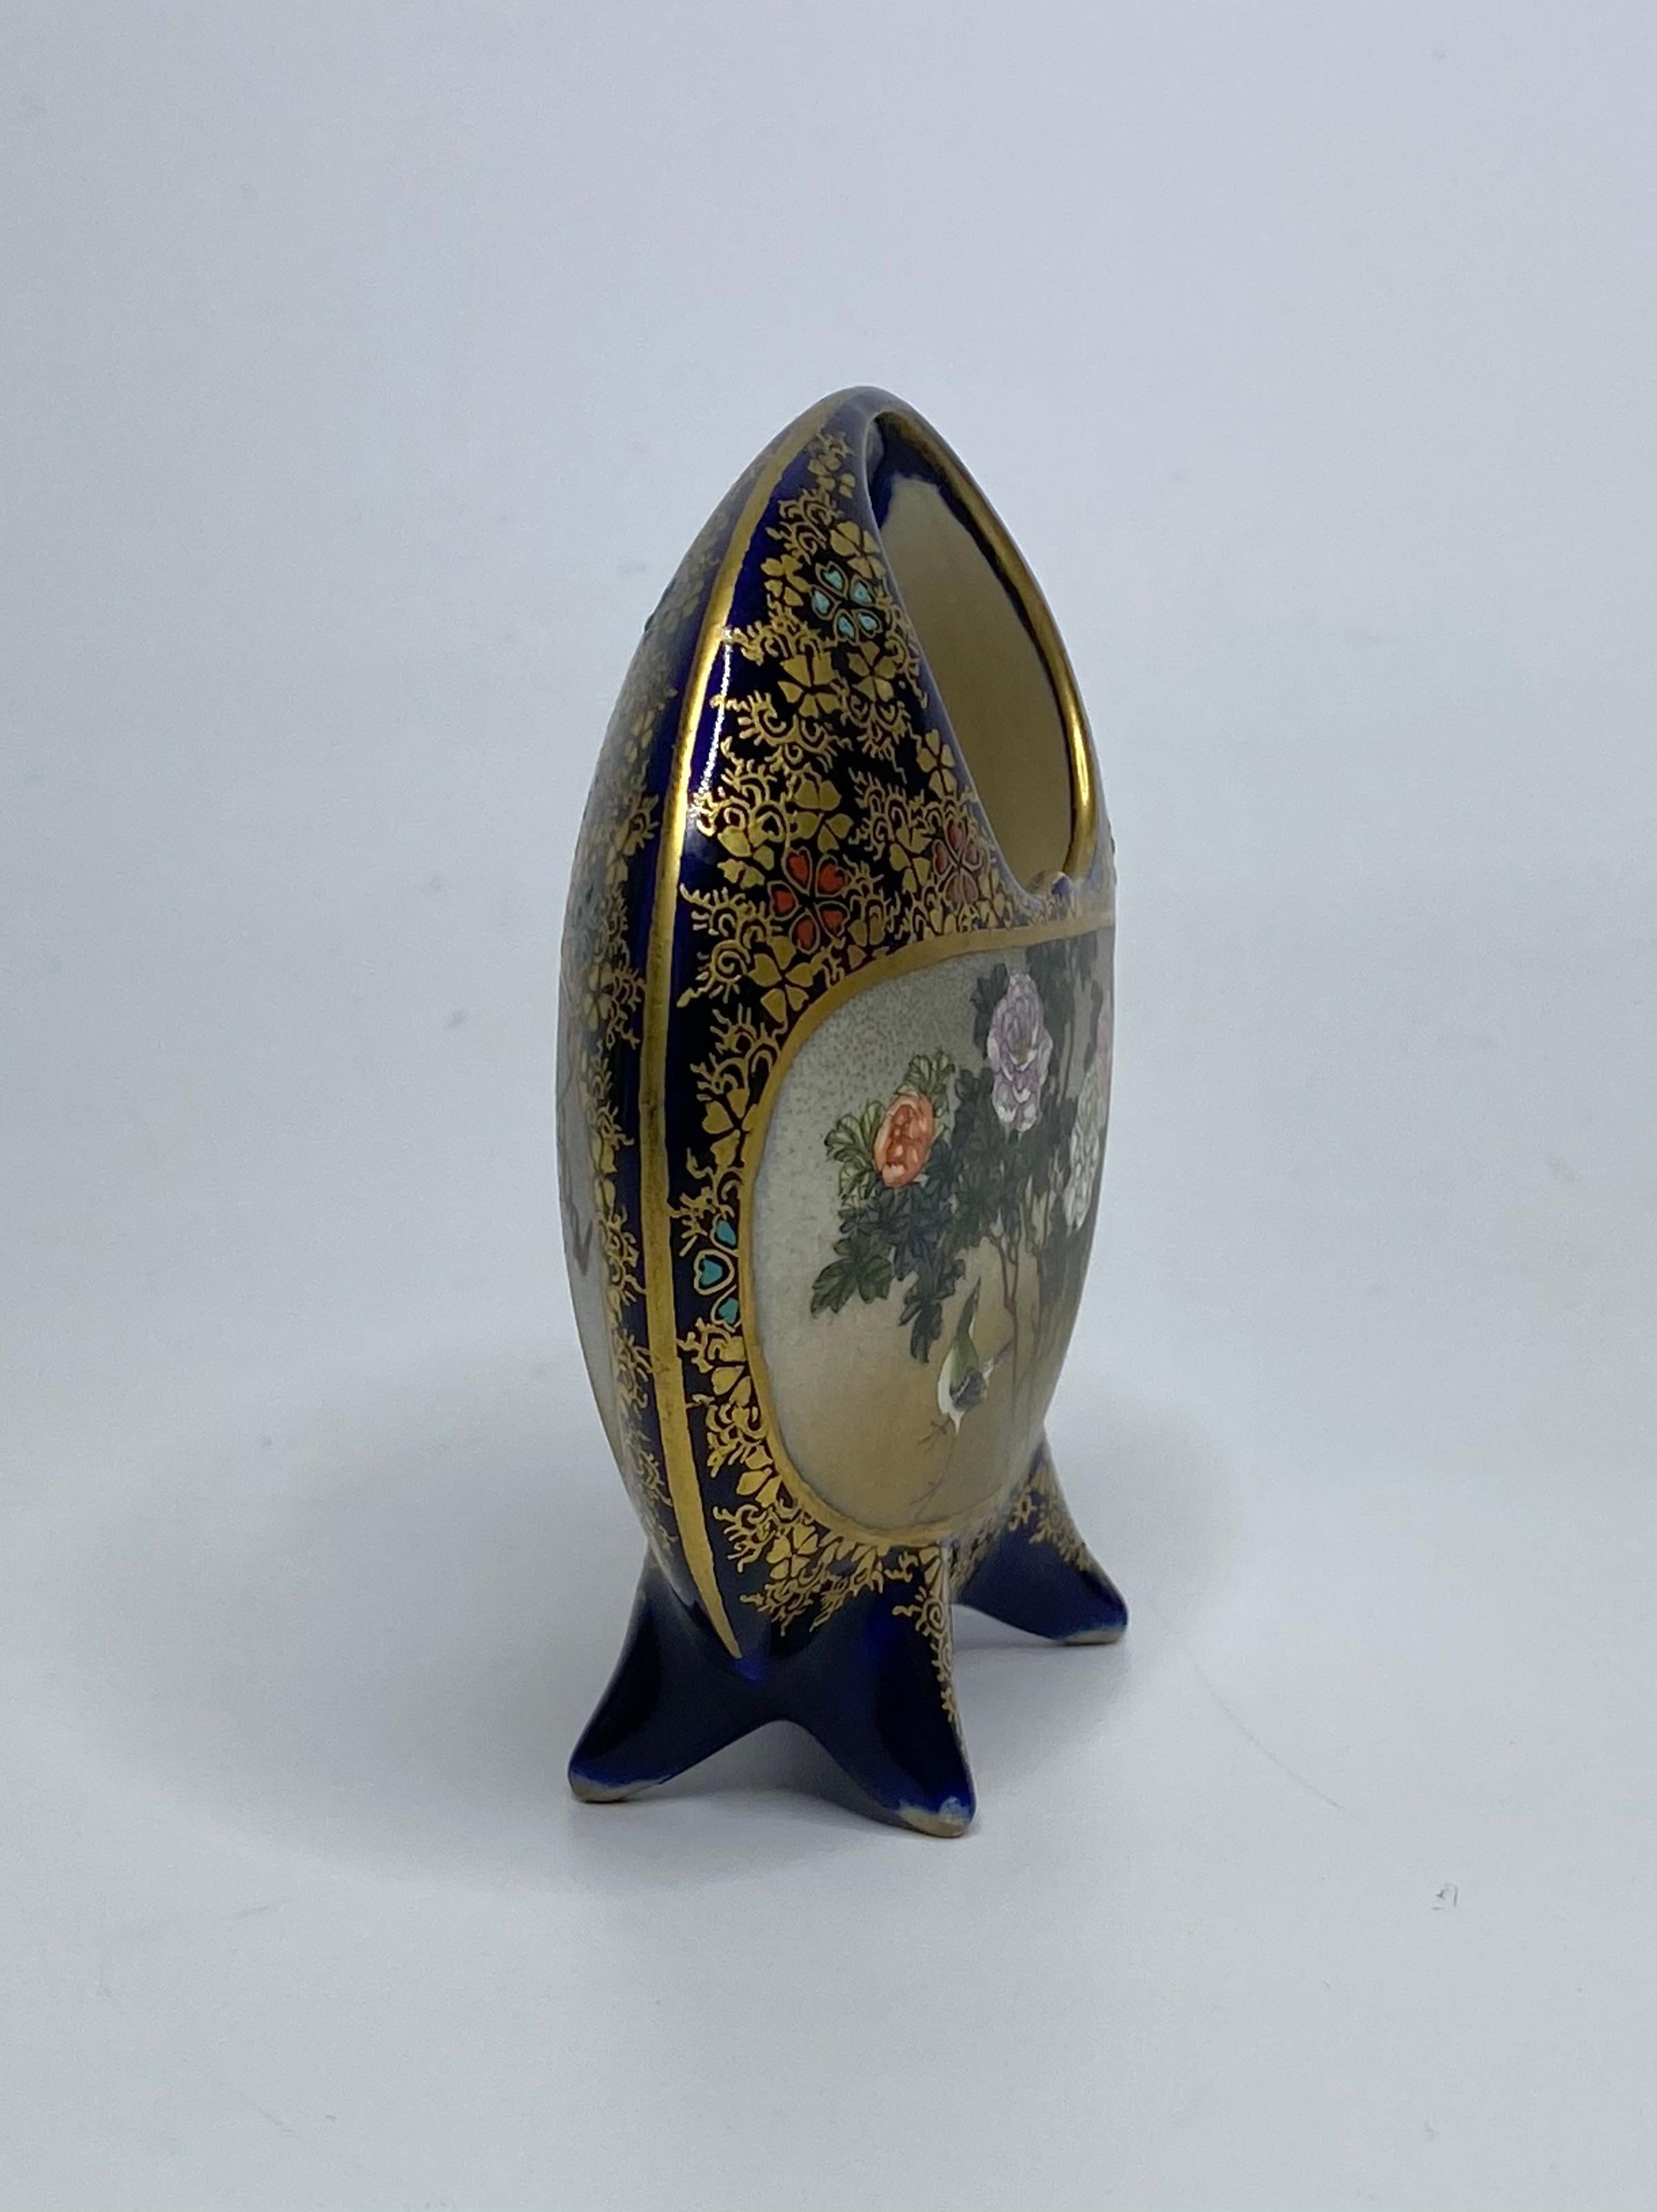 Satsuma pottery basket, Kinkozan, Meiji Period. The circular basket, hand painted with a panel of a bird, walking beneath flowering plants. The reverse with flowering wisteria.
All on an underglaze cobalt blue ground, with a dense covering of gilt